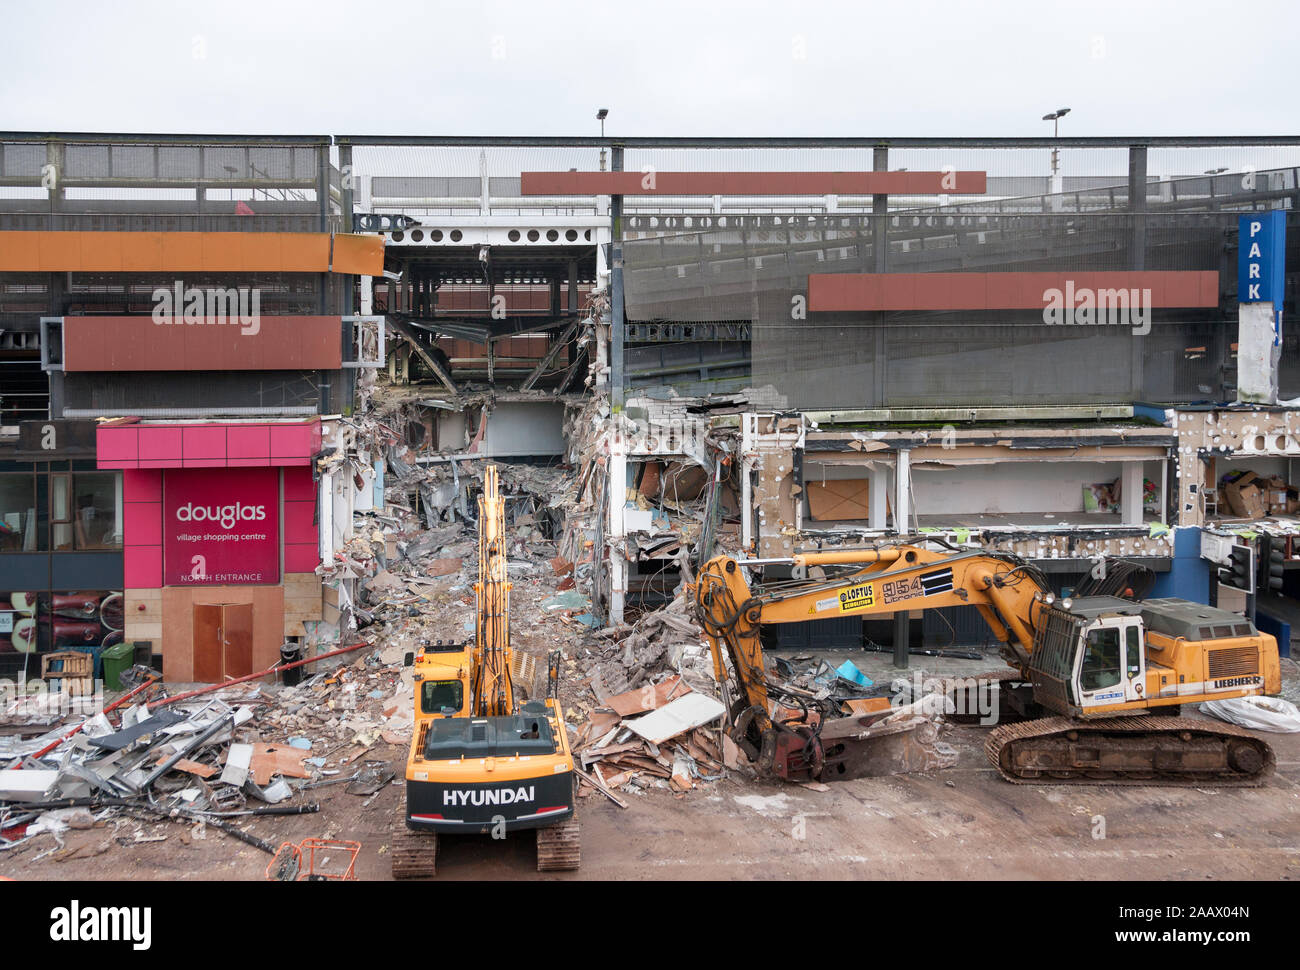 Douglas, Cork, Ireland. 24th November, 2019. Demolition works has started on the Douglas Village Shopping Centre in Cork after a major fire at the end of August. The Centre was forced to close when a car caught fire on the first floor of the multi-storey car park and quickly spread to other vehicles, resulting in extensive structural damage. Credit; David Creedon/Alamy Live News Stock Photo